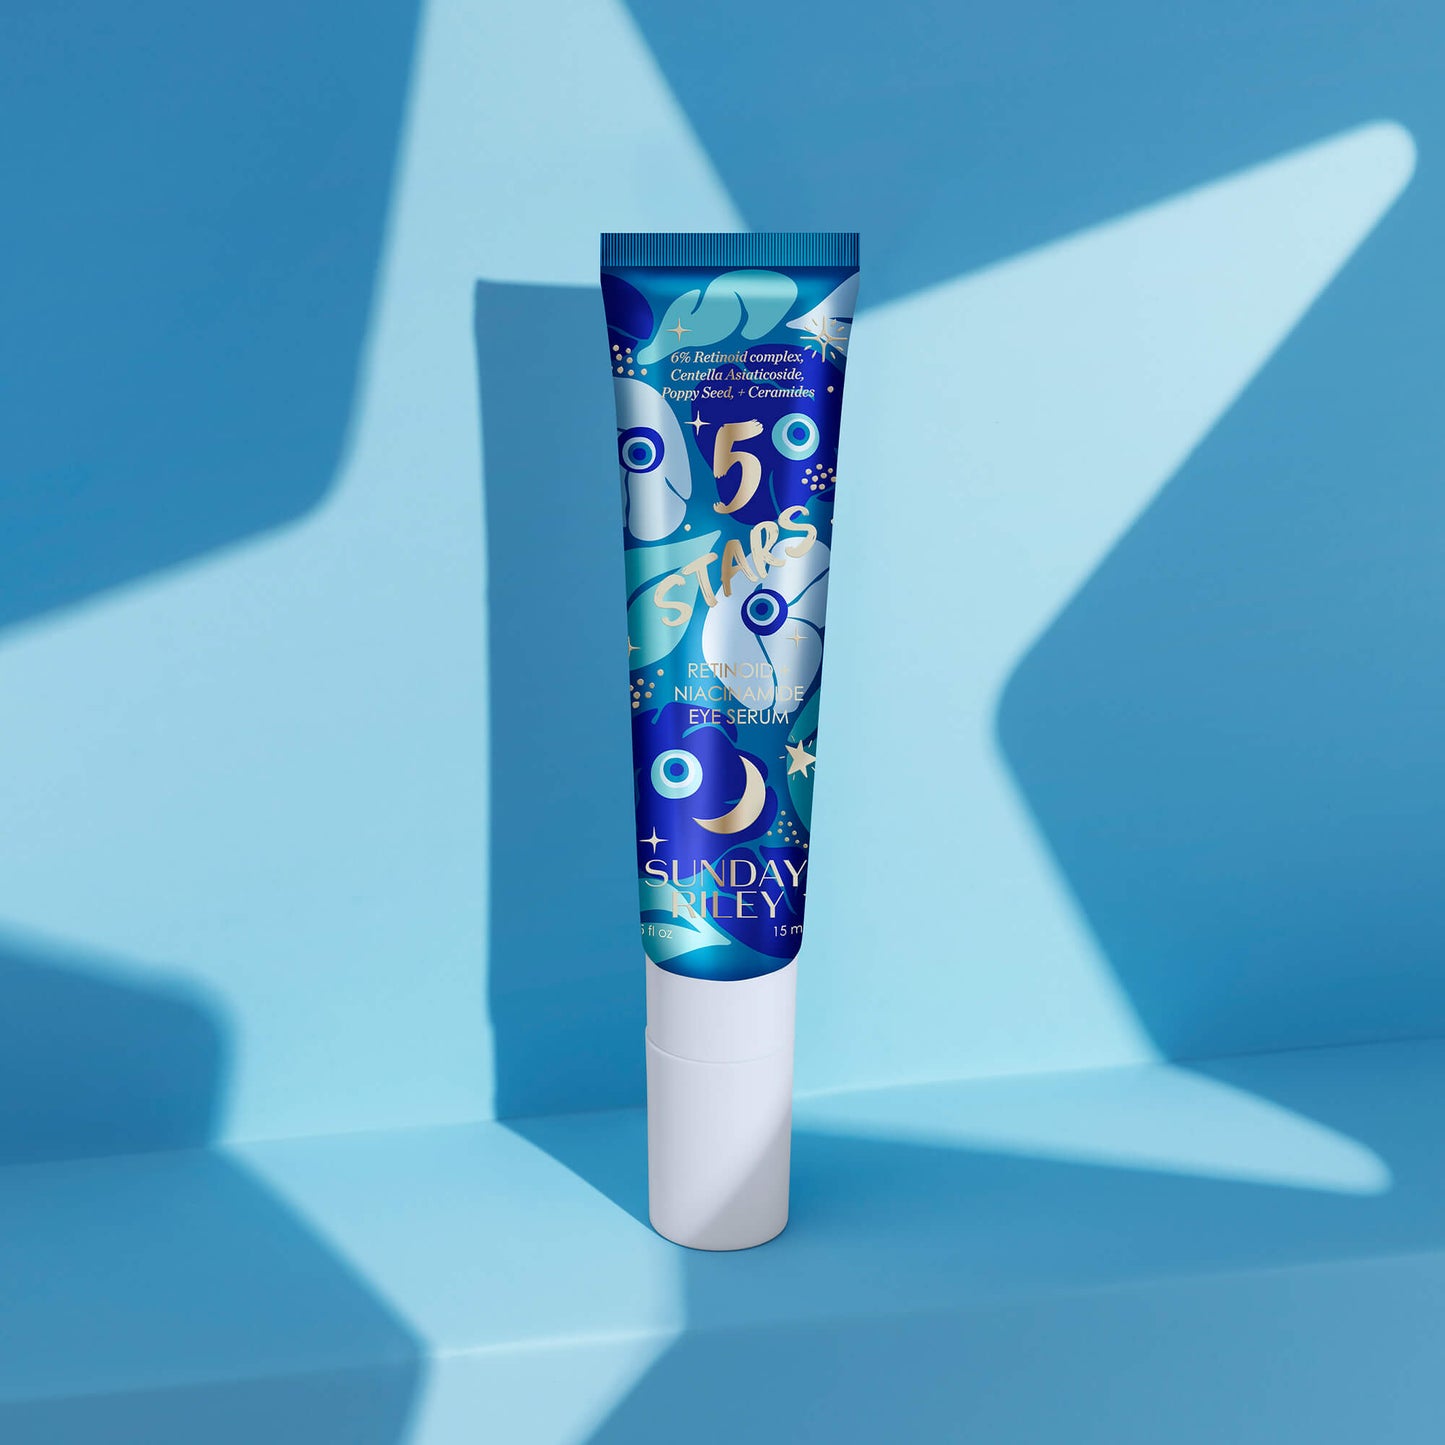 5 Stars bottle standing on a blue shelf with blue background with a star shaped flashlight